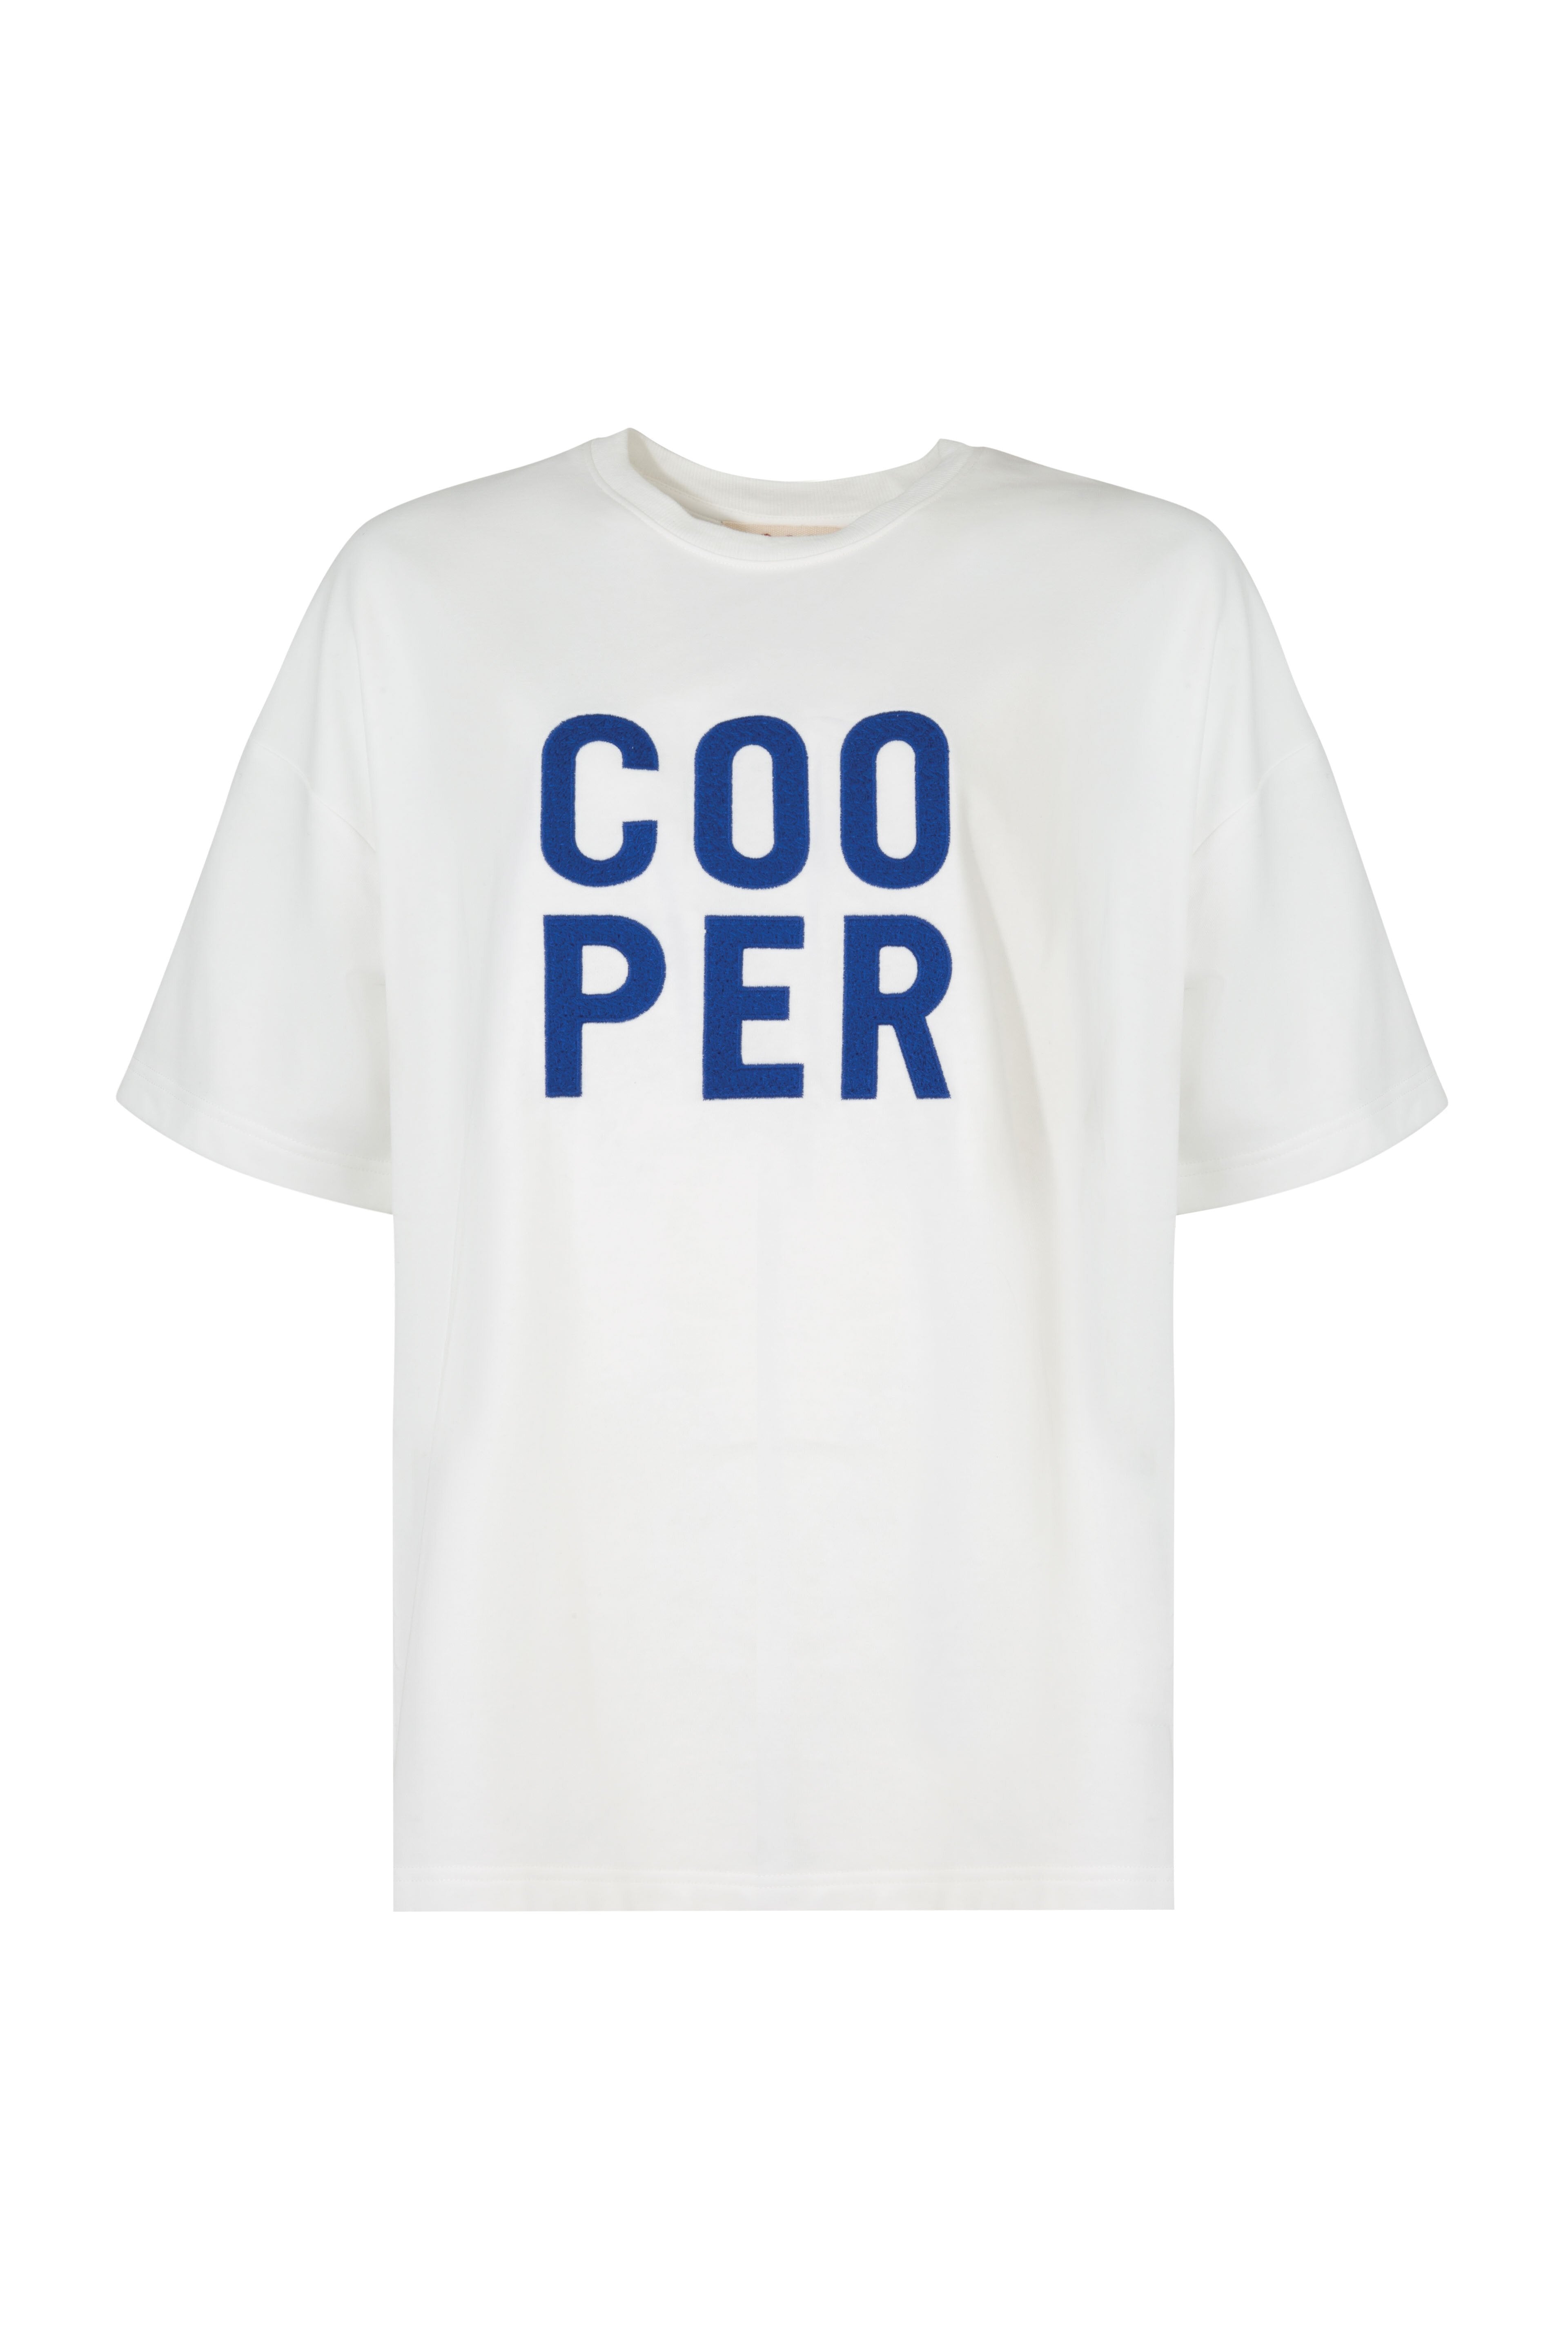 COOPER CASUALLY COOPER T-Shirt